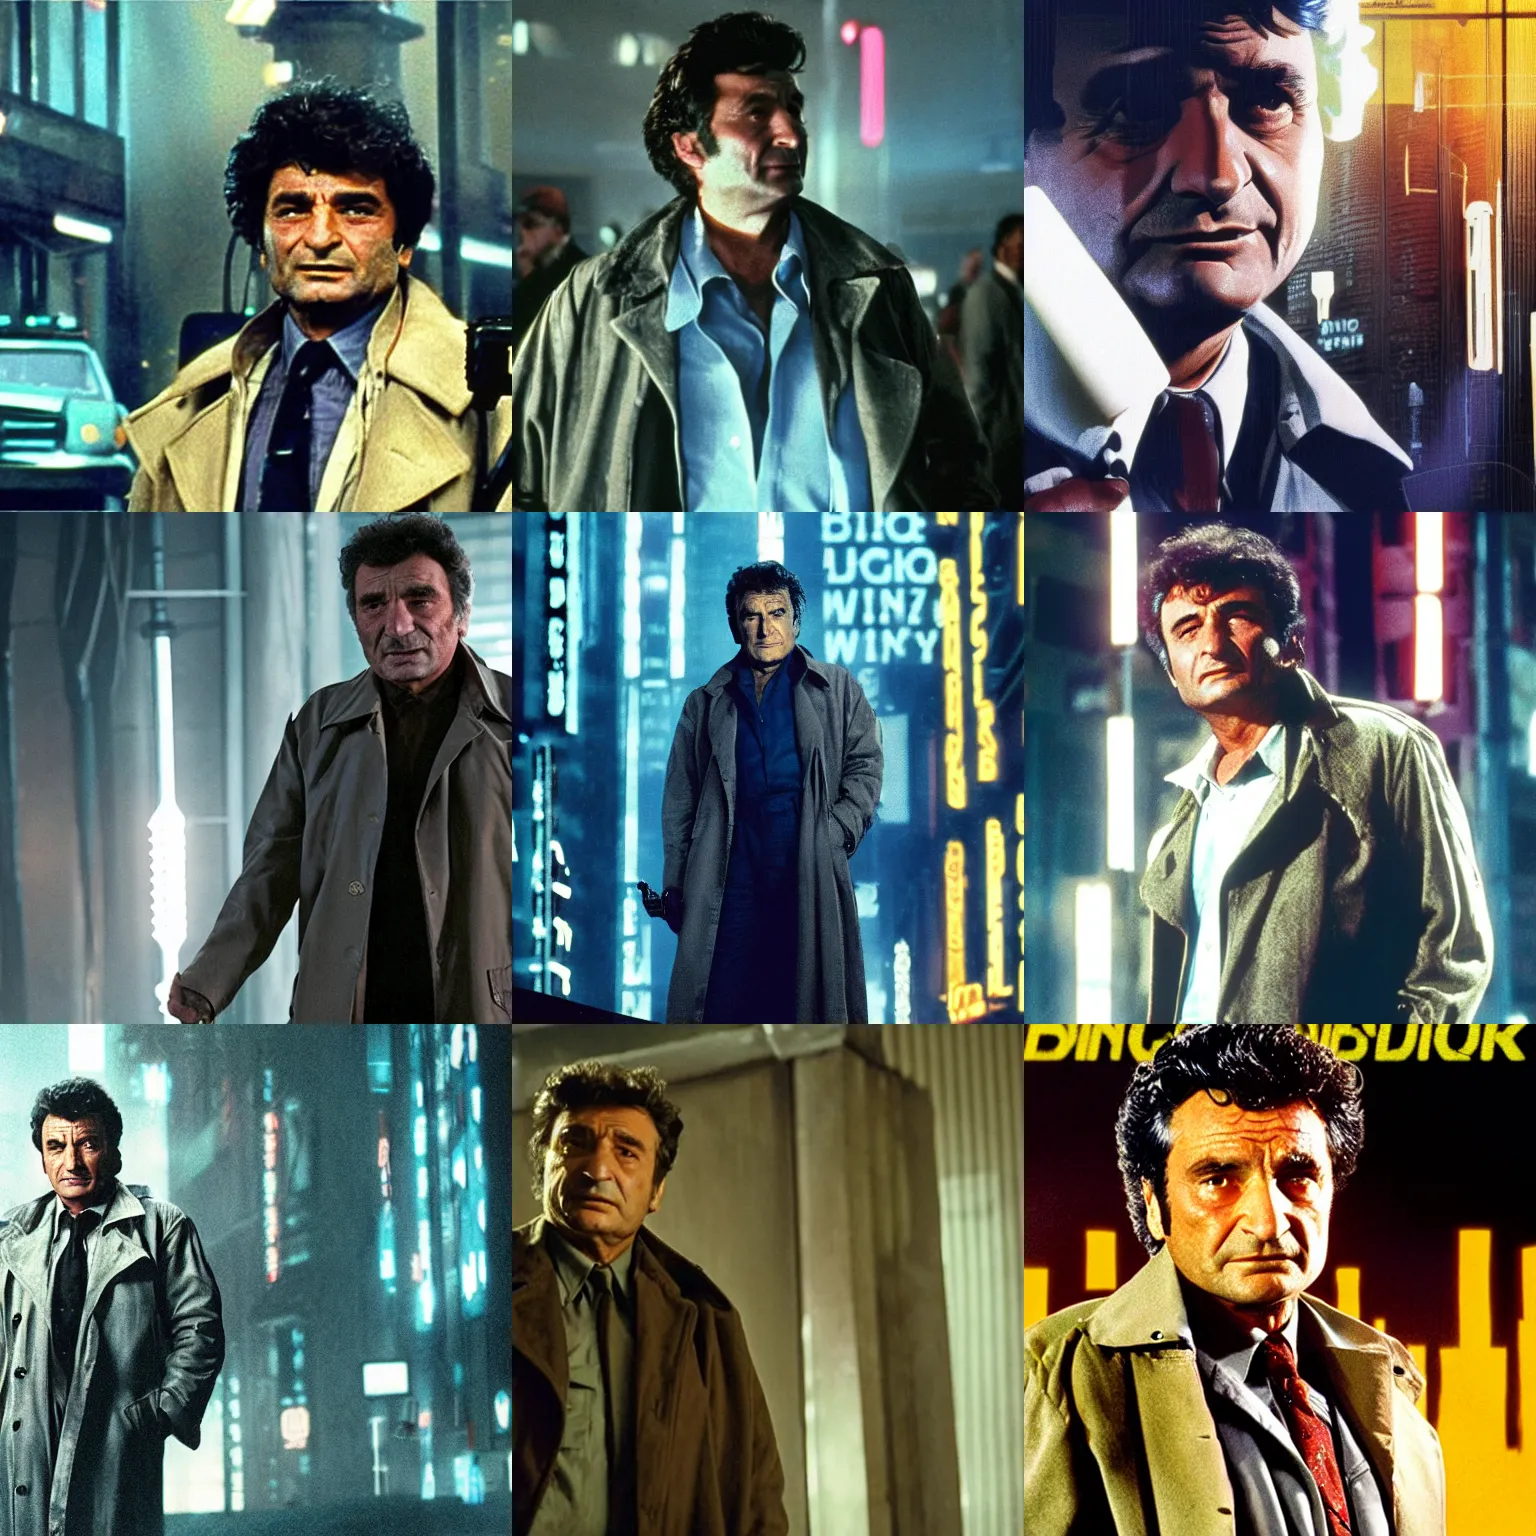 Prompt: police detective columbo ( played by young peter falk ) in his messy trenchcoat, smirking, in the movie bladerunner, led lights, cyberpunk 2 0 4 9, cyberpunk 2 0 7 7, city